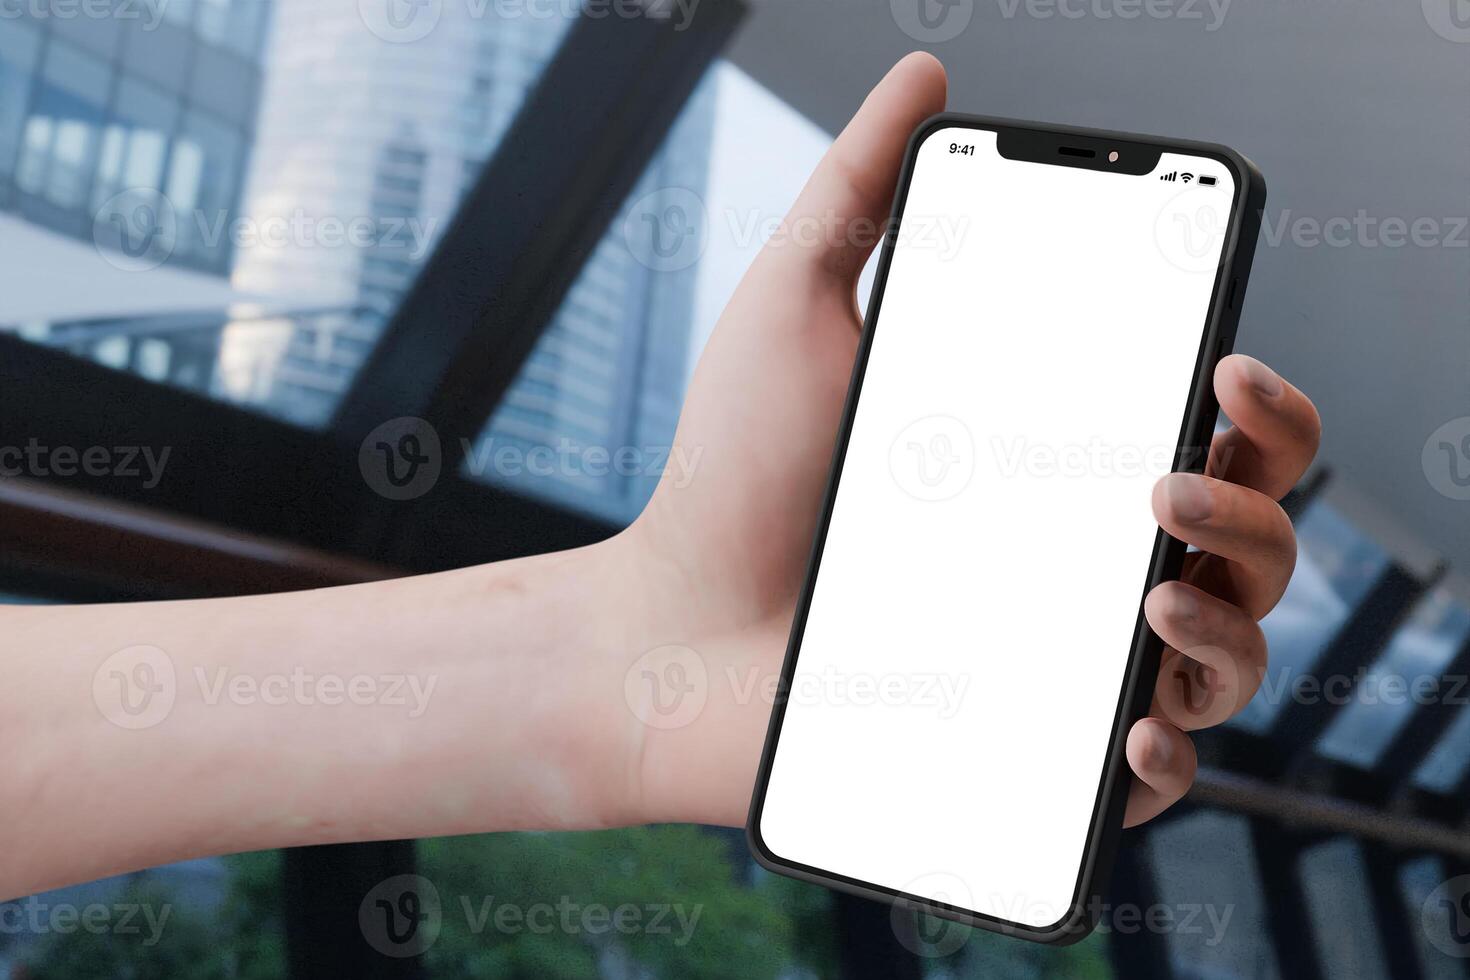 Smartphone mockup in a hand holding it with urban business environment photo